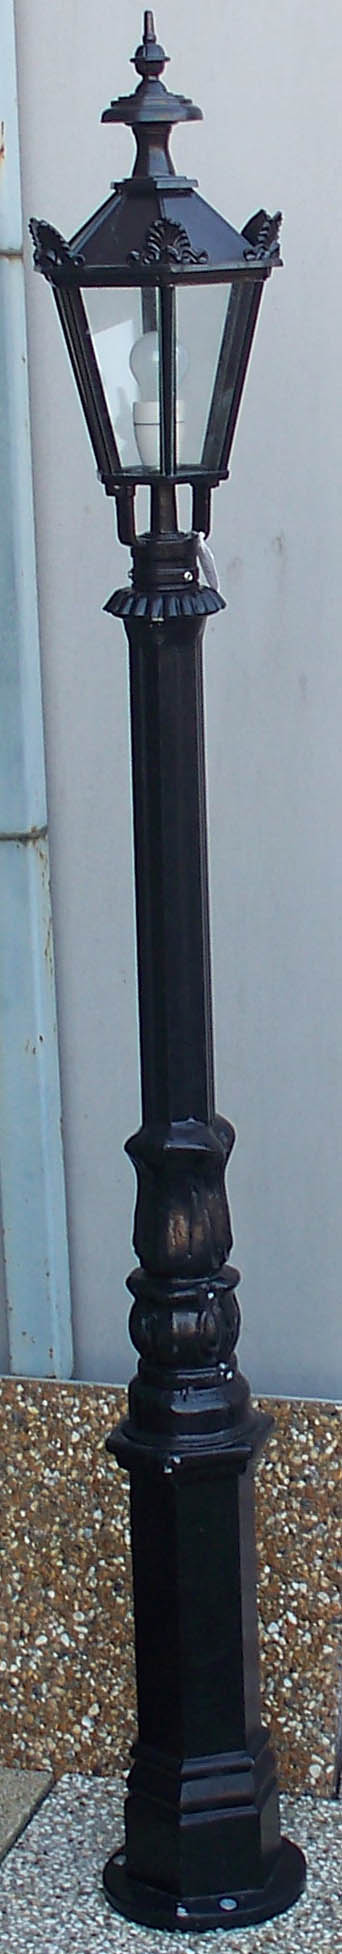 No 5 pole with small 6 sided head